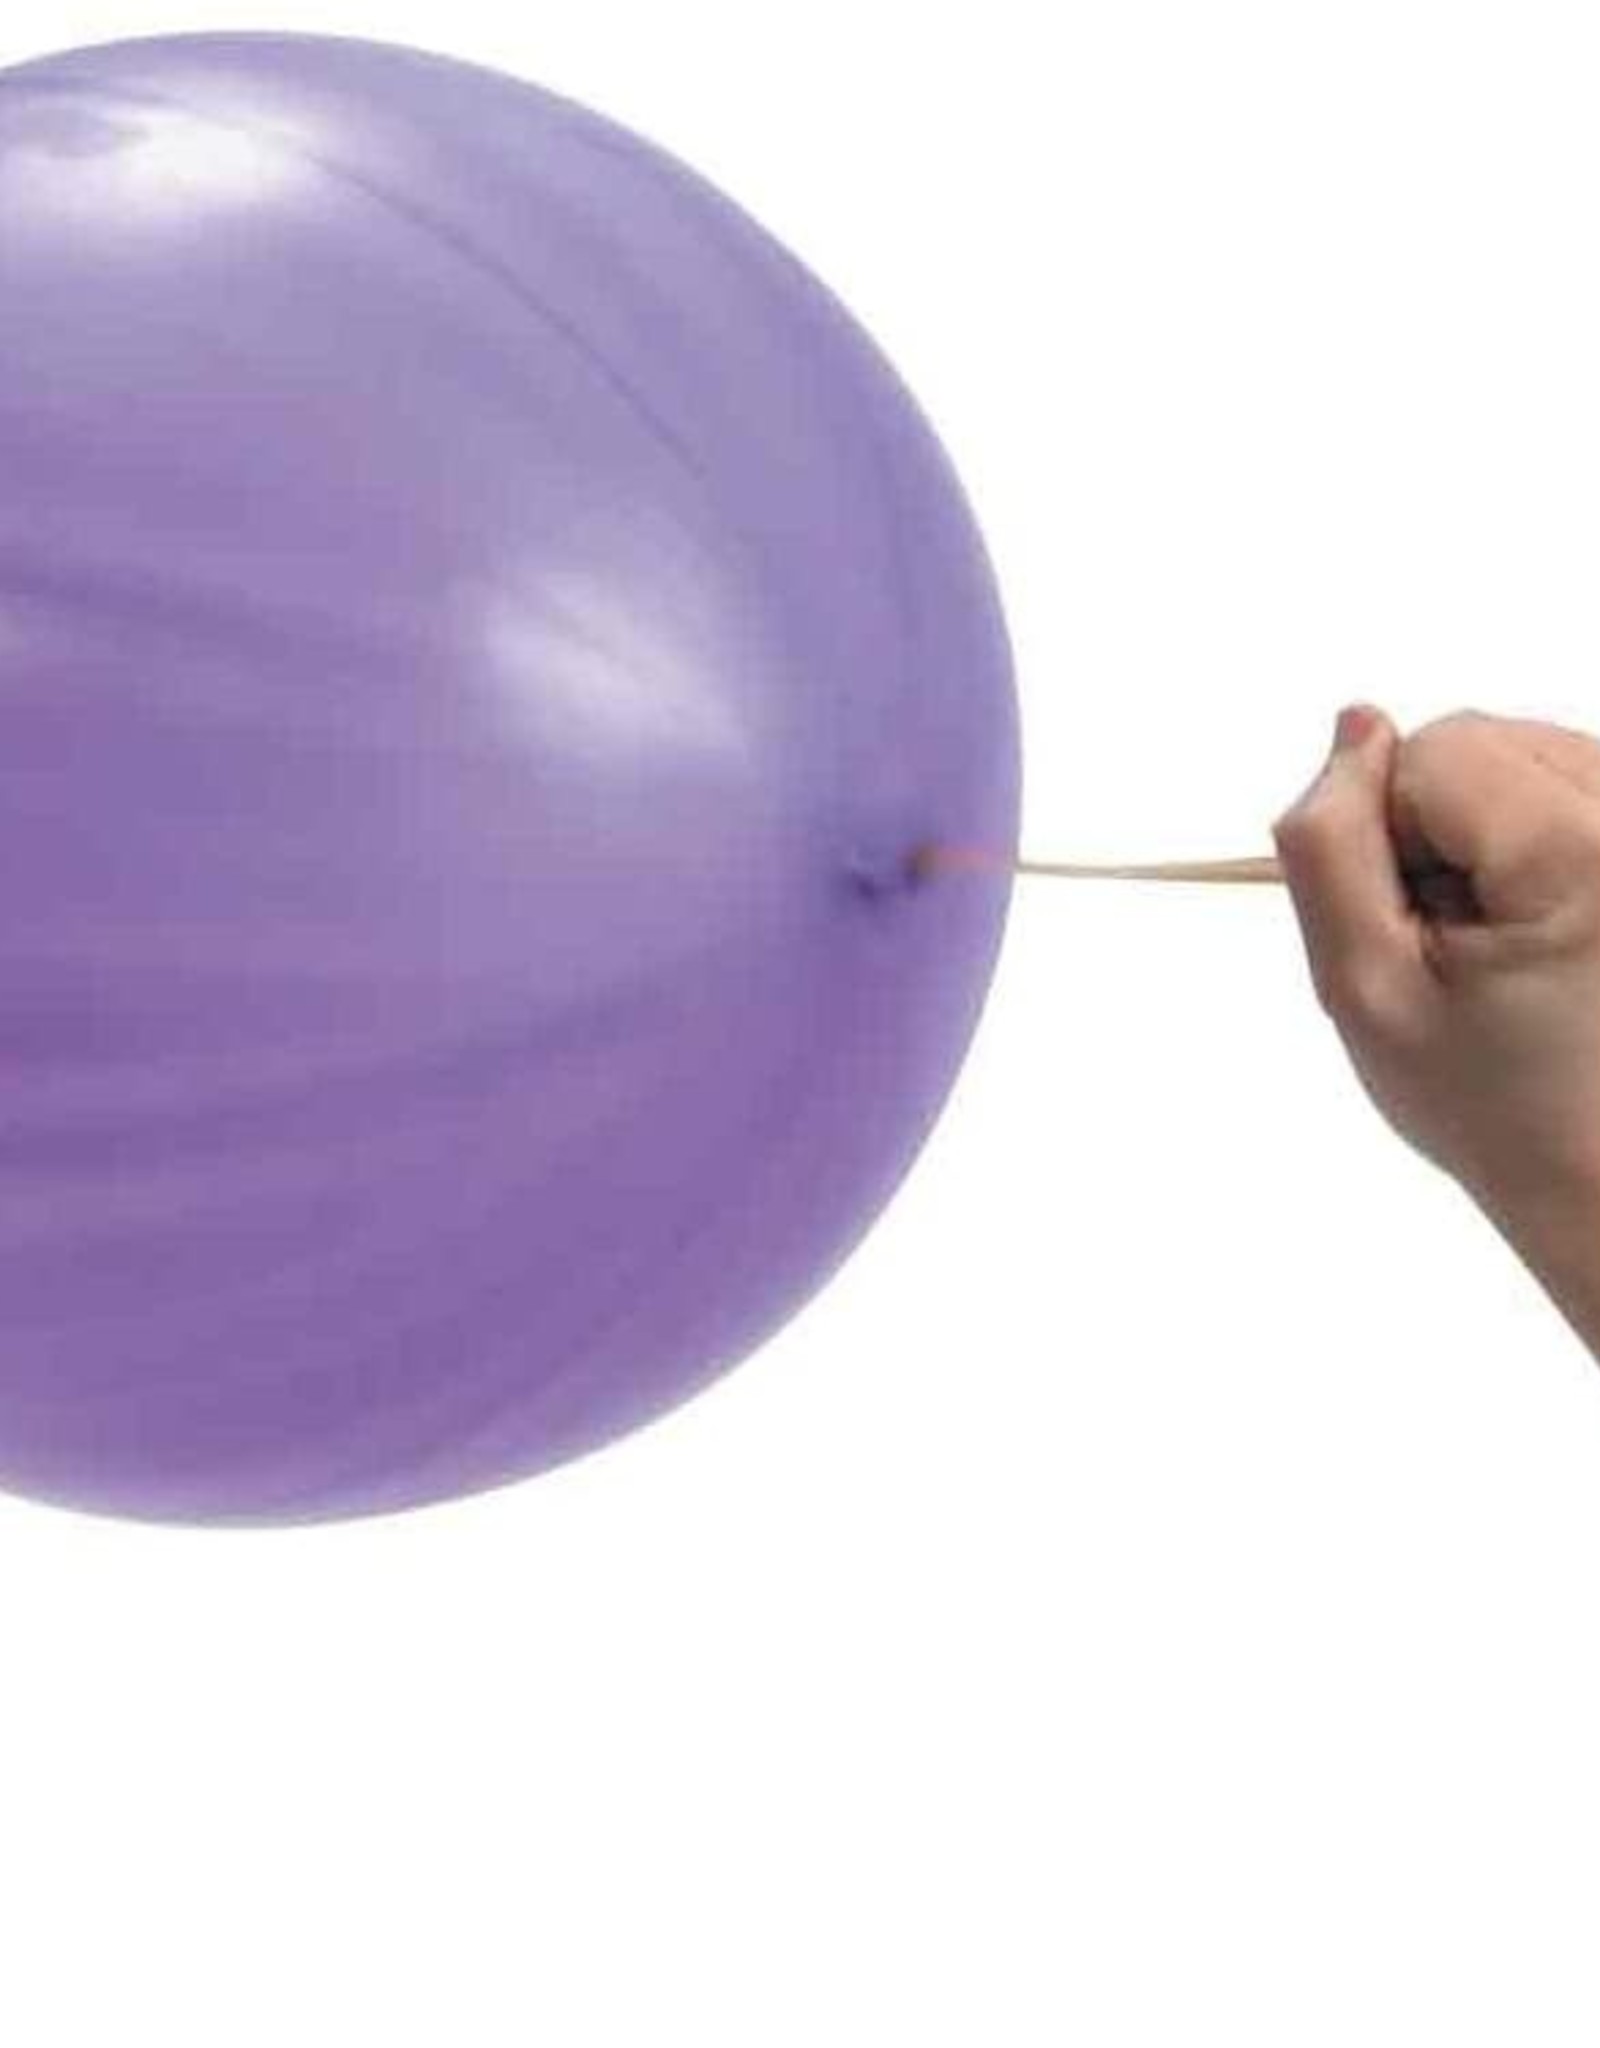 PUNCH BALLOONS